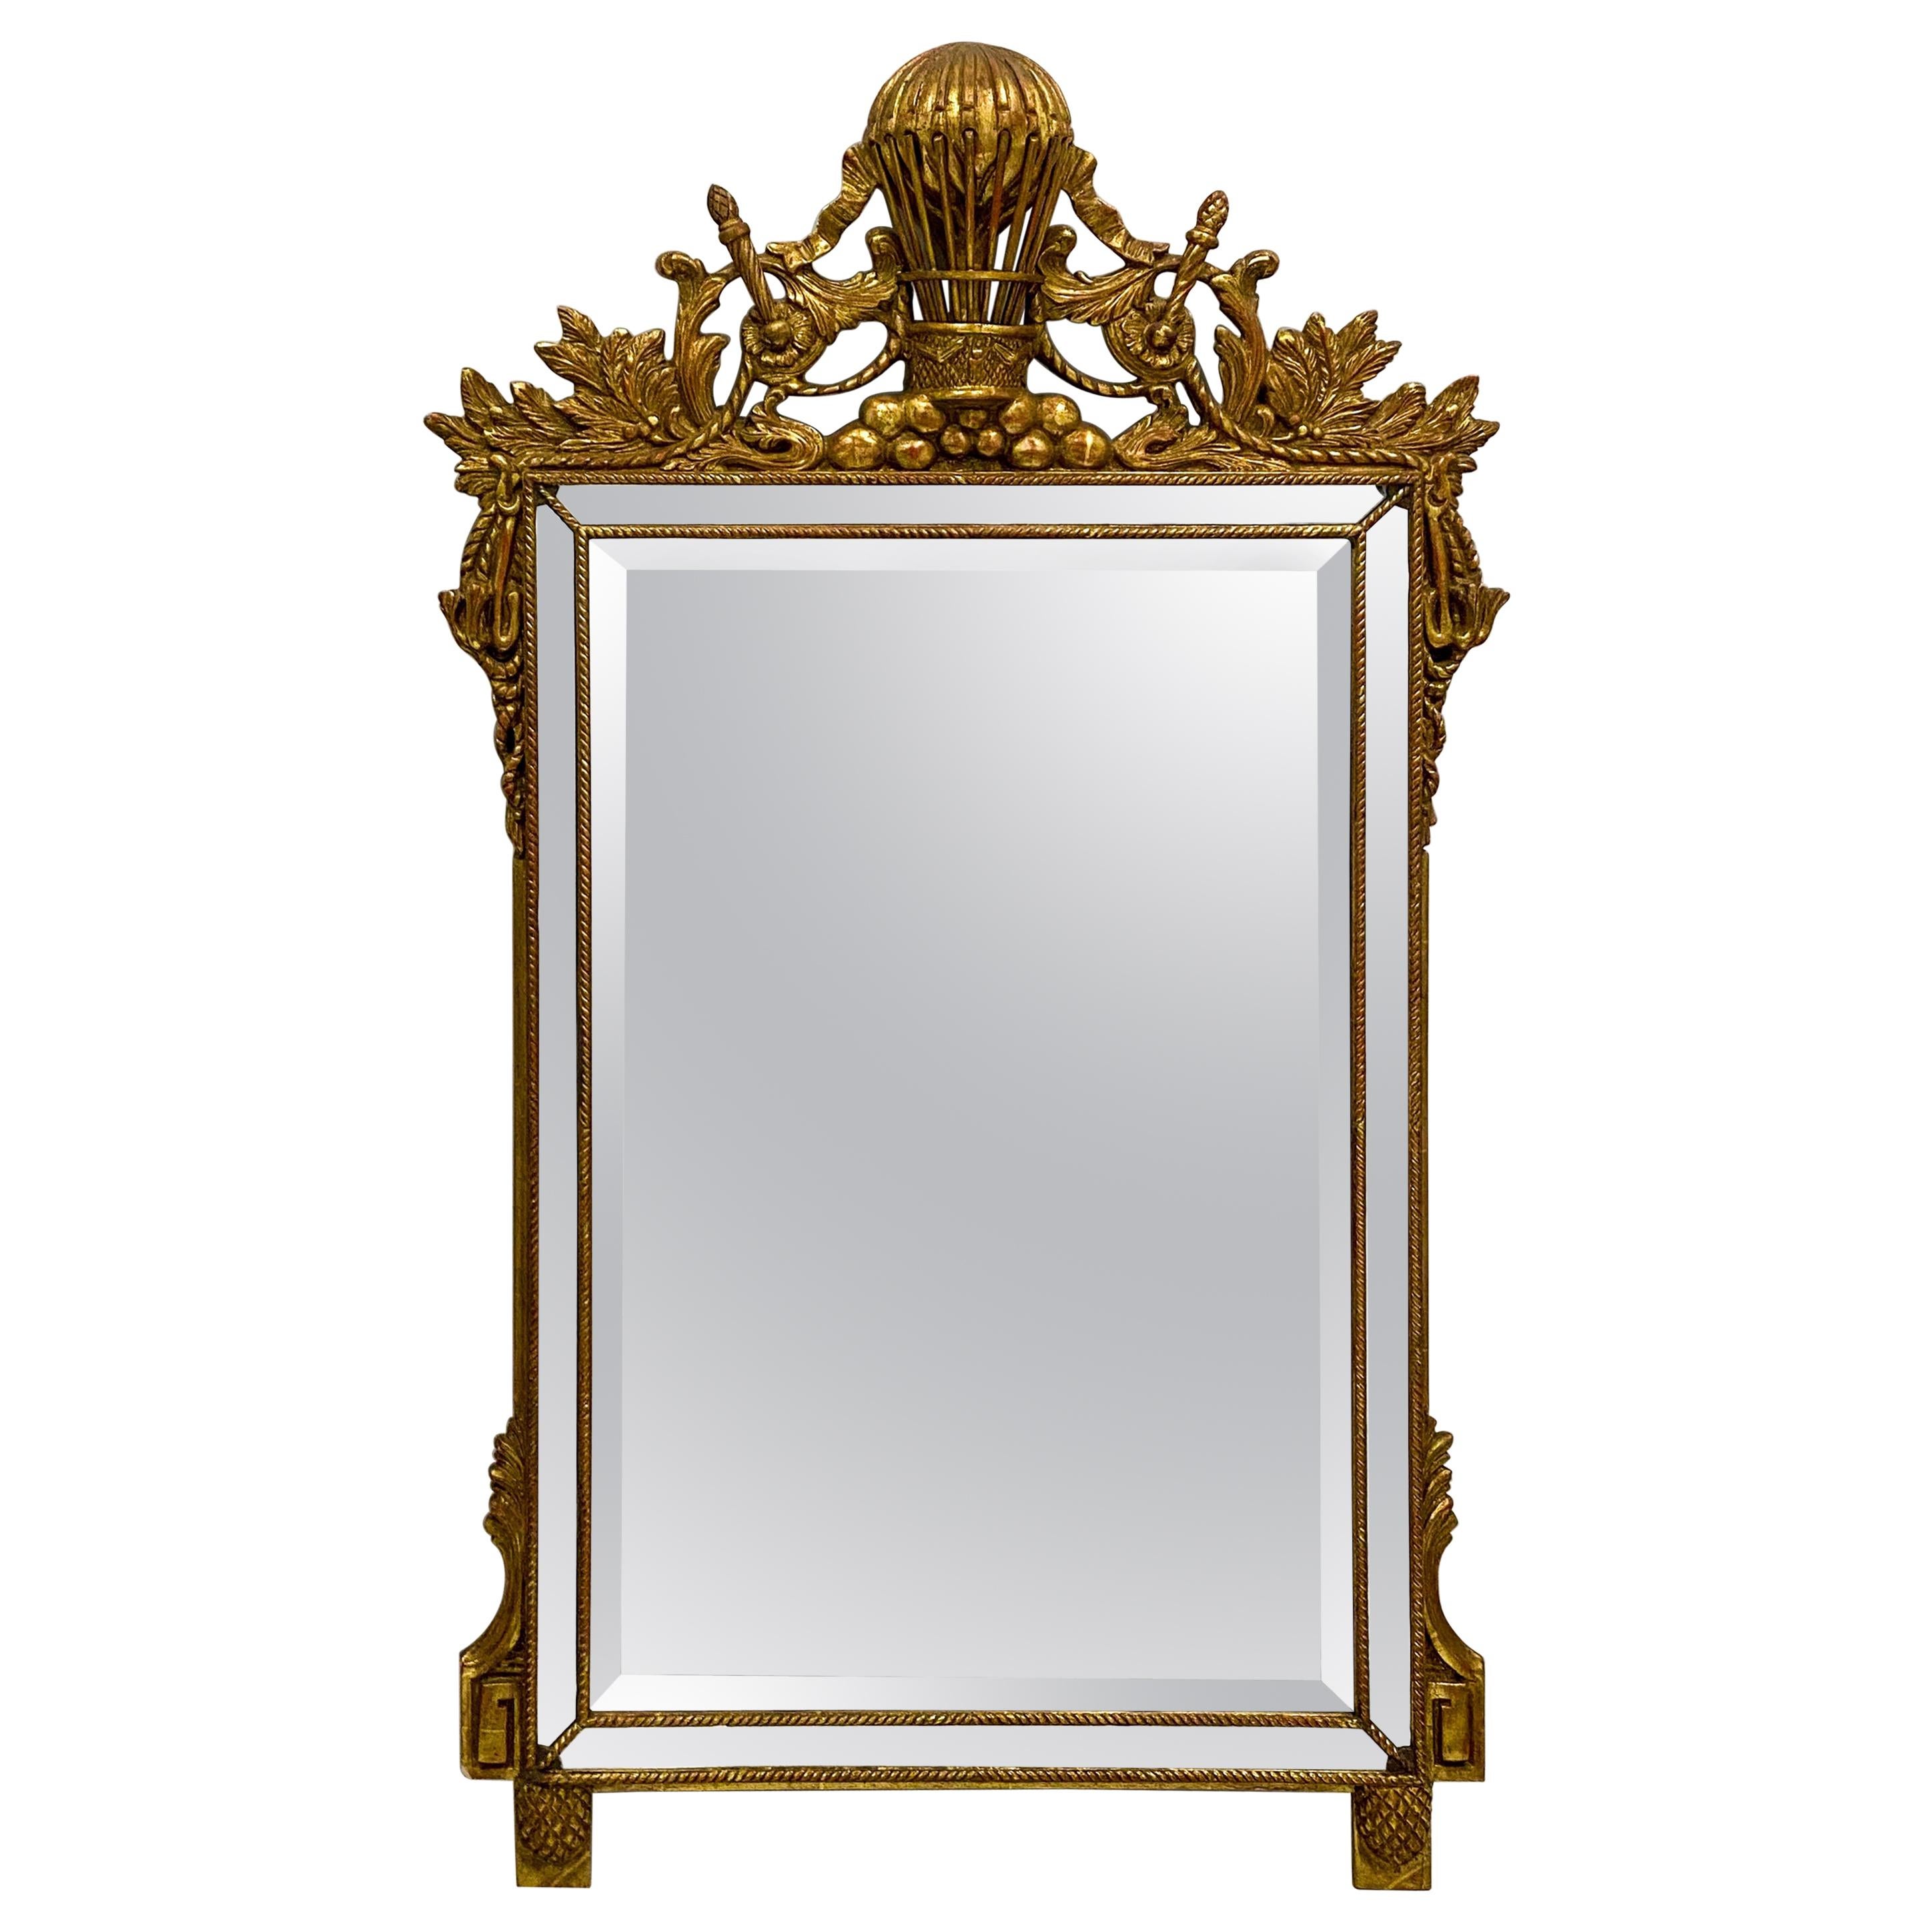 Midcentury French Napoleonic Themed Carved Giltwood Mirror